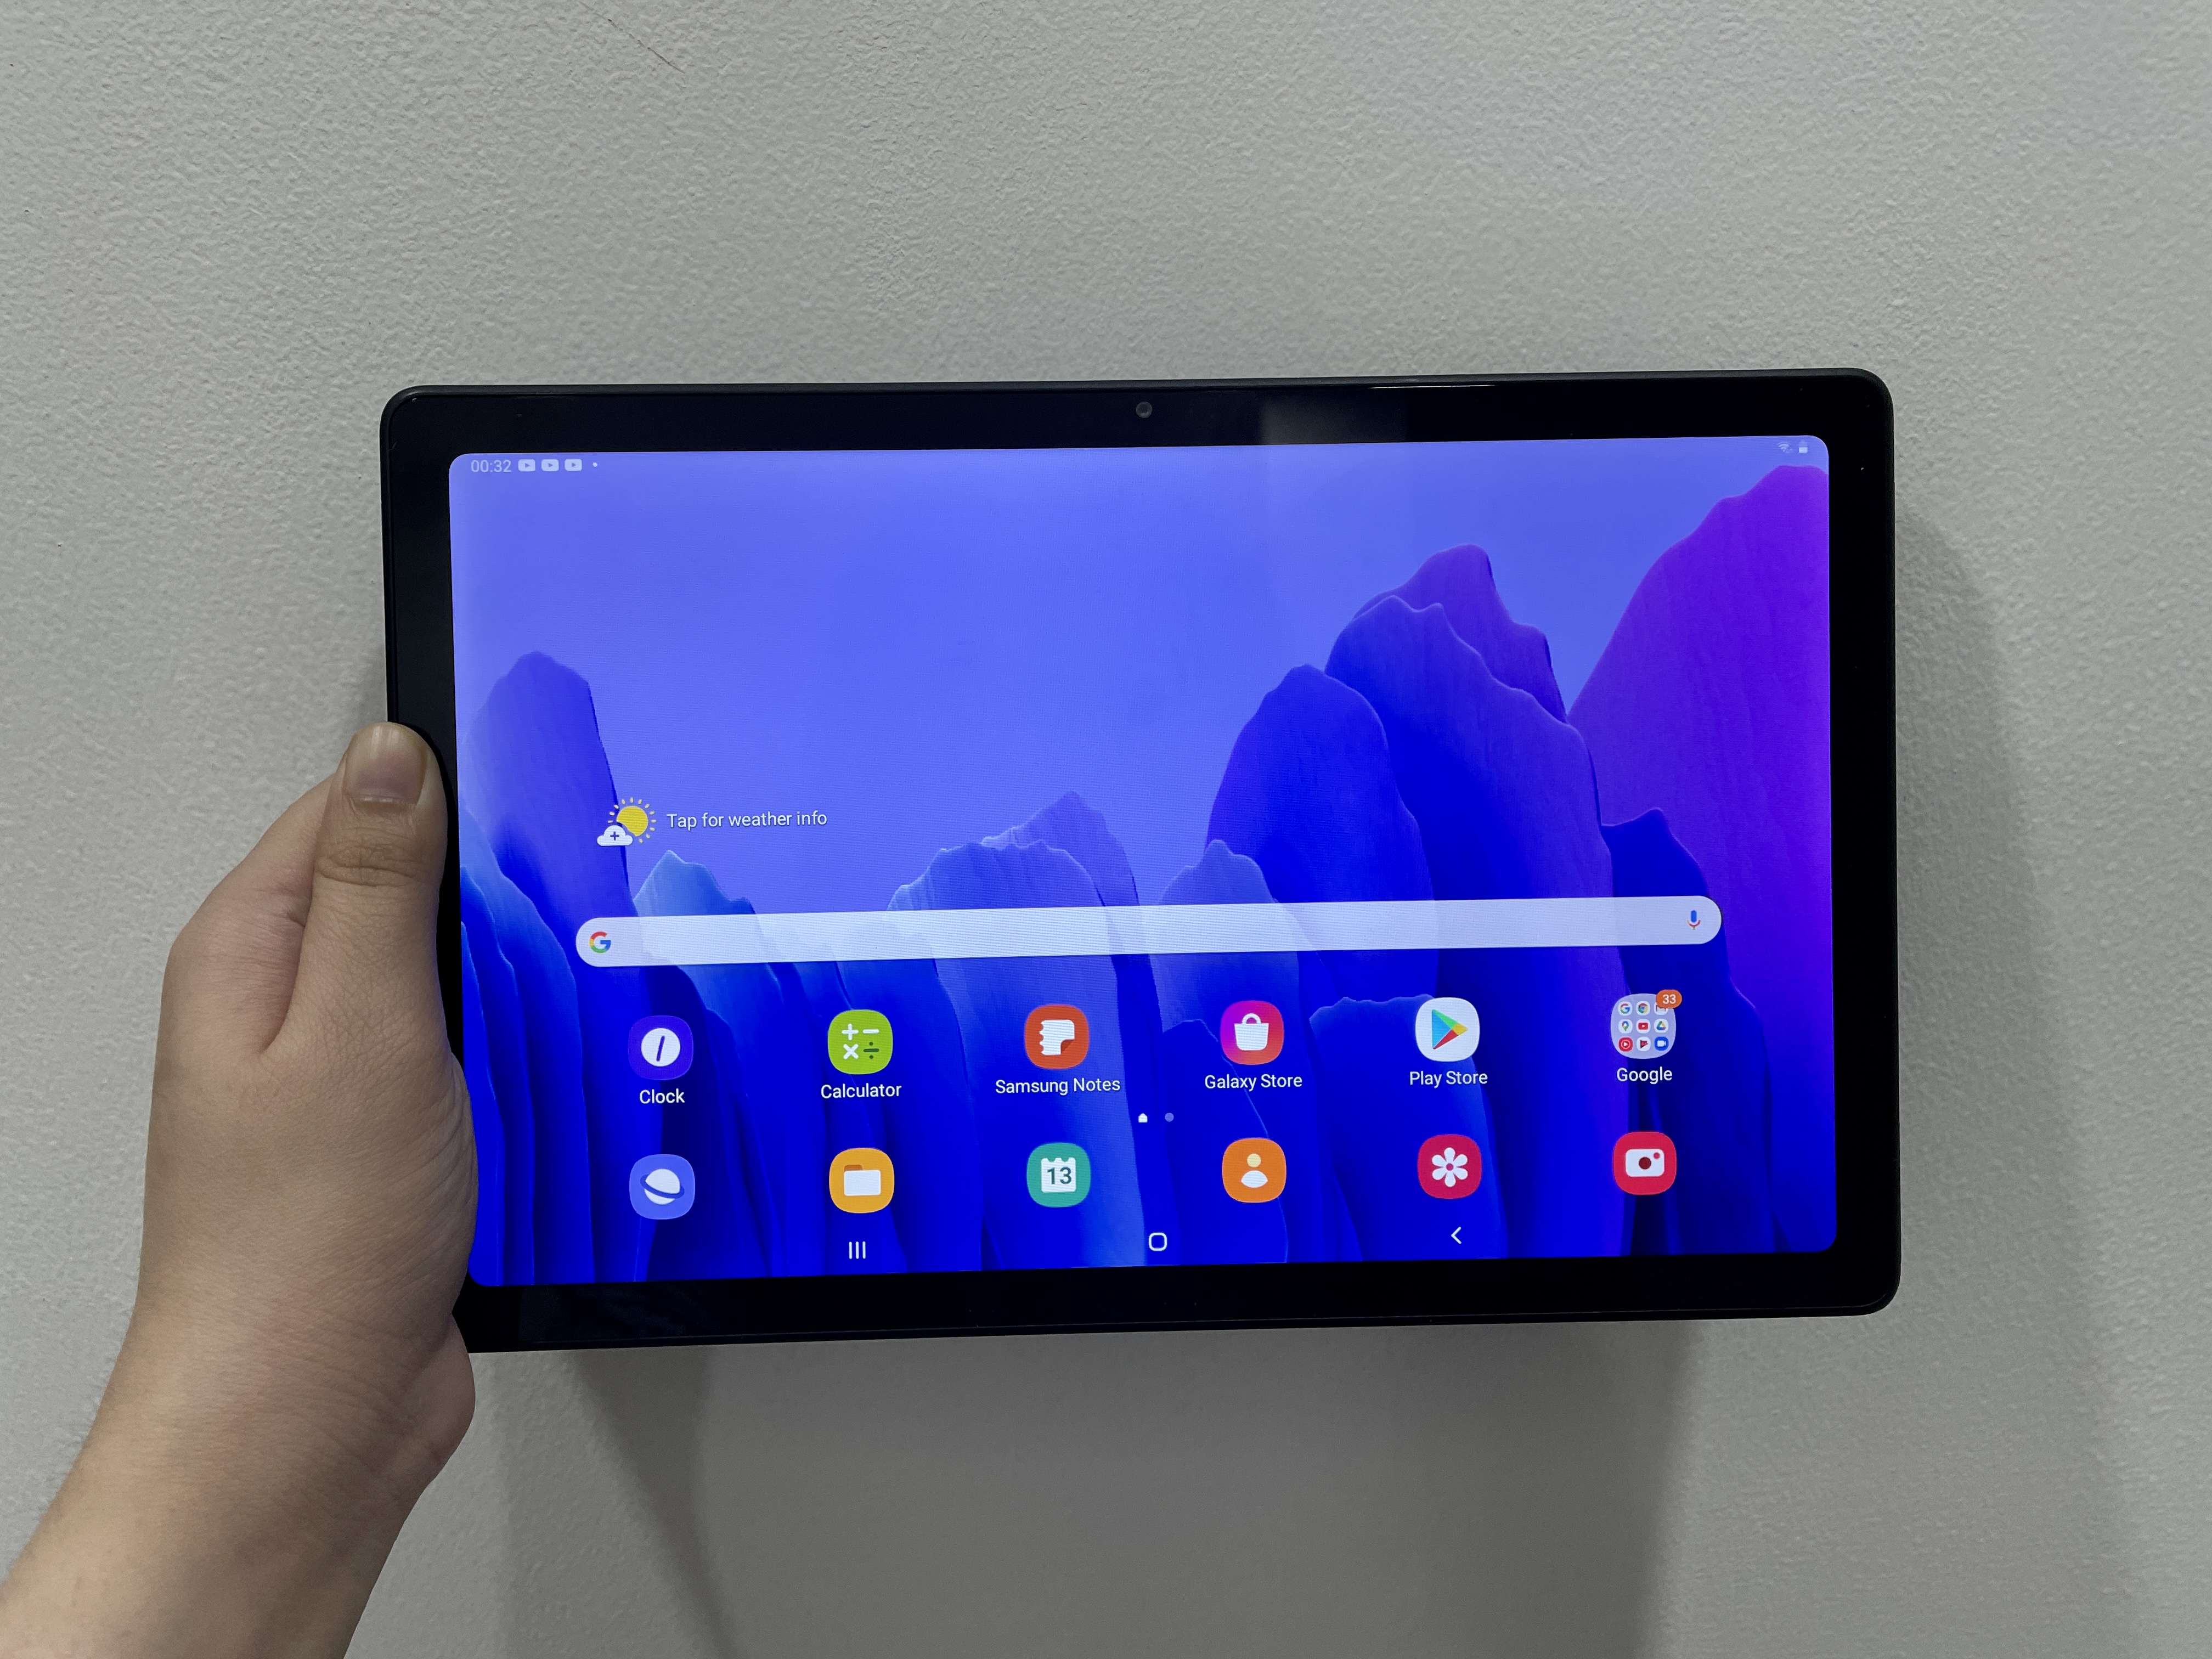 Samsung Galaxy Tab A7 2020 Price in India, Full Specifications (13th Dec 2020) at Gadgets Now